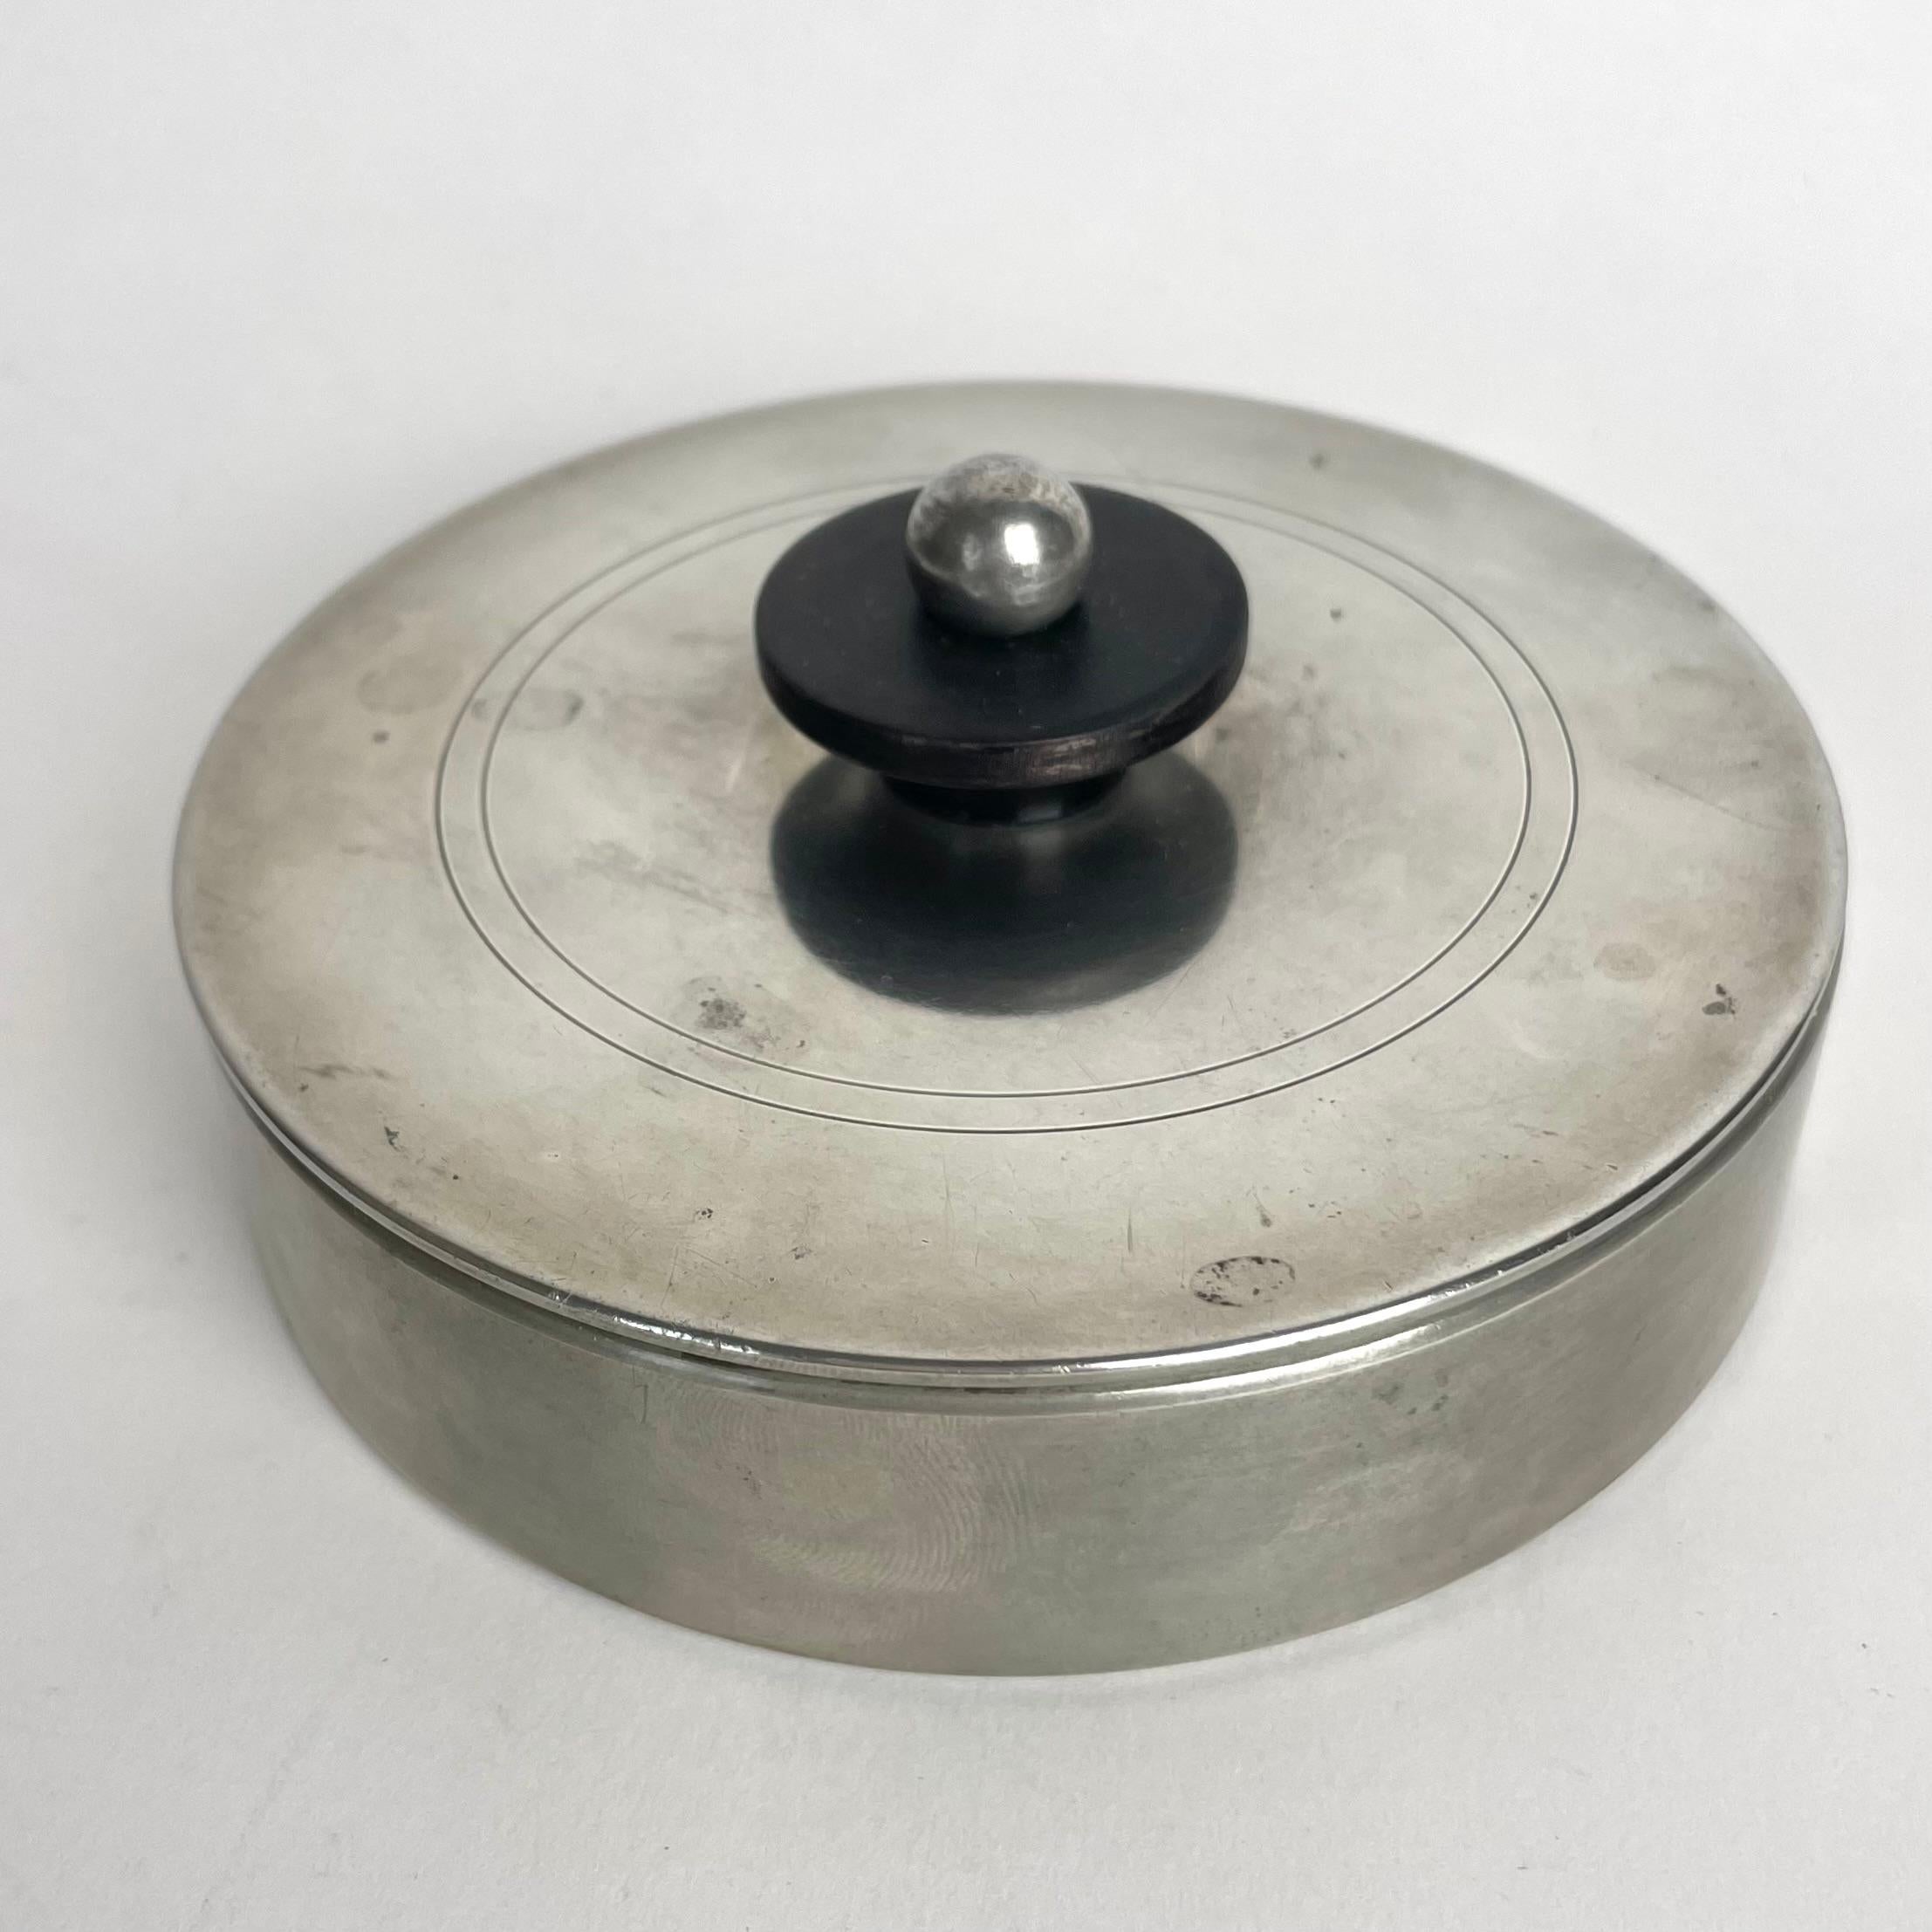 Elegant Art Deco Pewter box with lid and mirror inside from GAB Guldsmedsaktiebolaget, Sweden in 1935 (I8). Simple and elegant design in pewter with blackened birch handle.

Wear consistent with age and use 